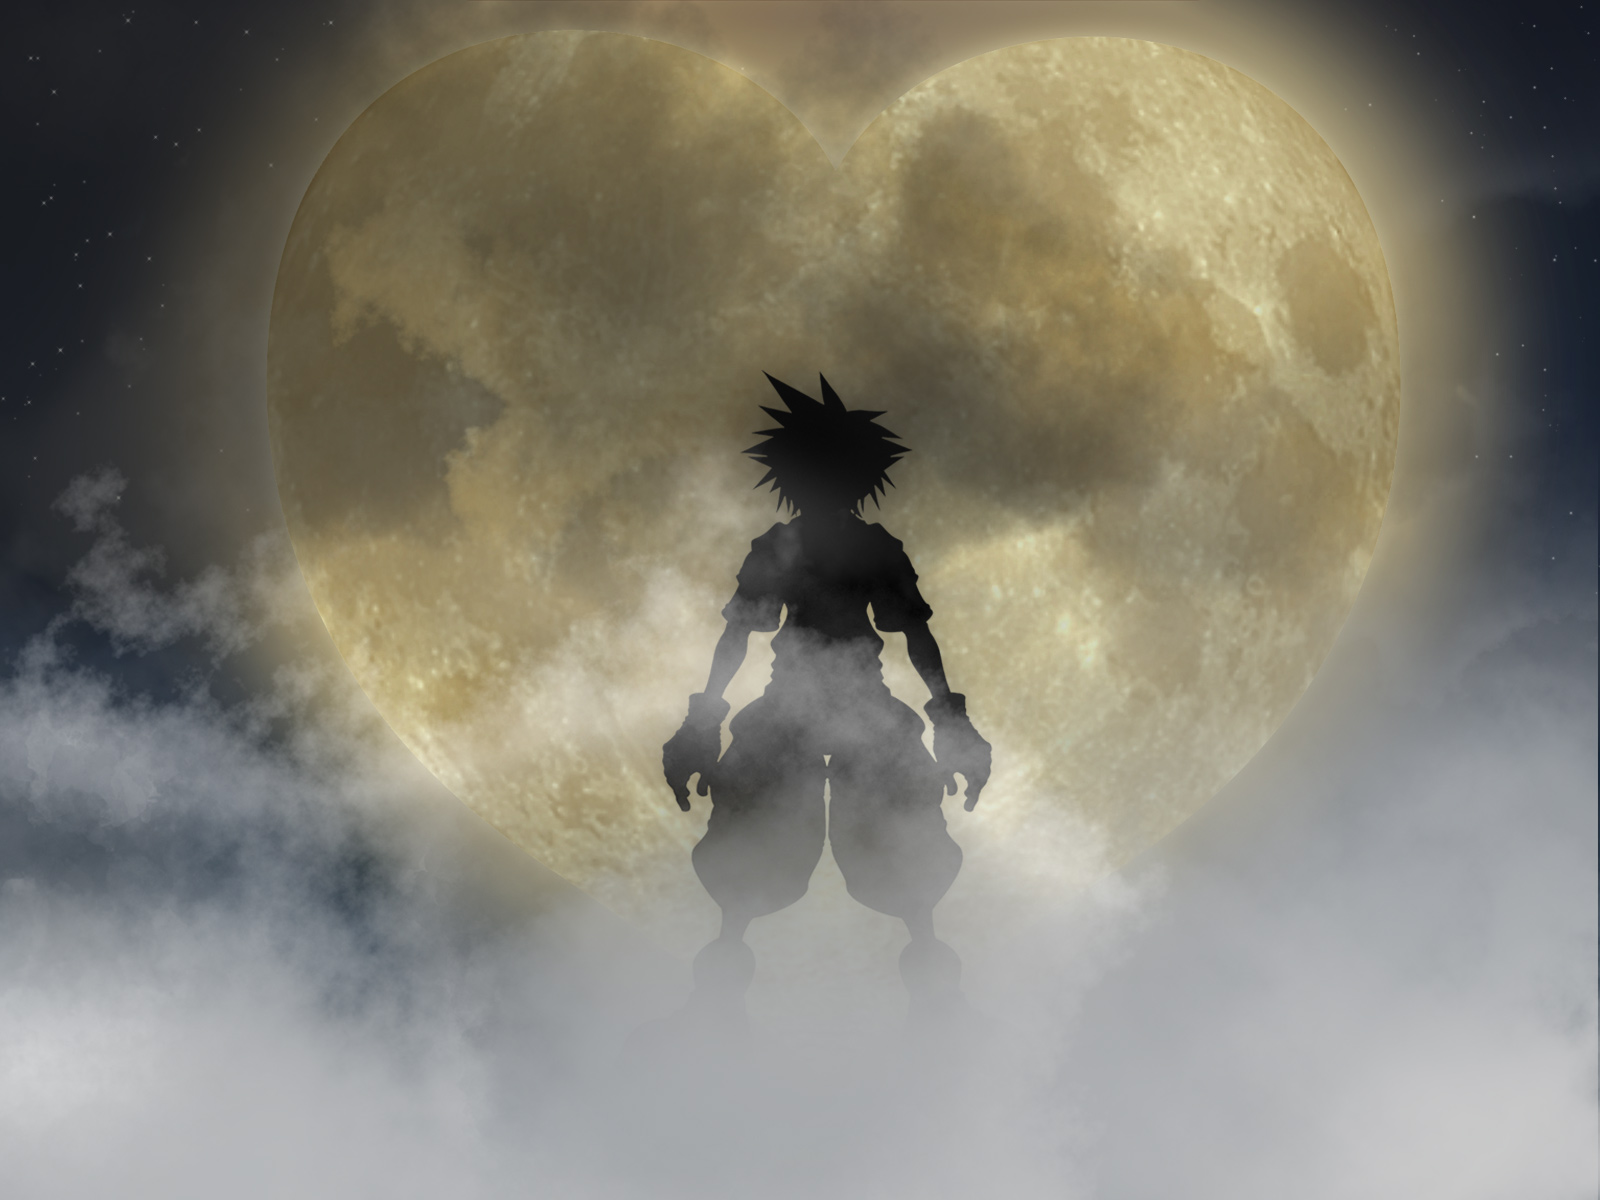 Leytrx on Twitter Kingdom Hearts Emblems Mobile Wallpapers  Heartless   Nobodies  Unversed  Spirits httpstcoqdn9mA1jQf  X